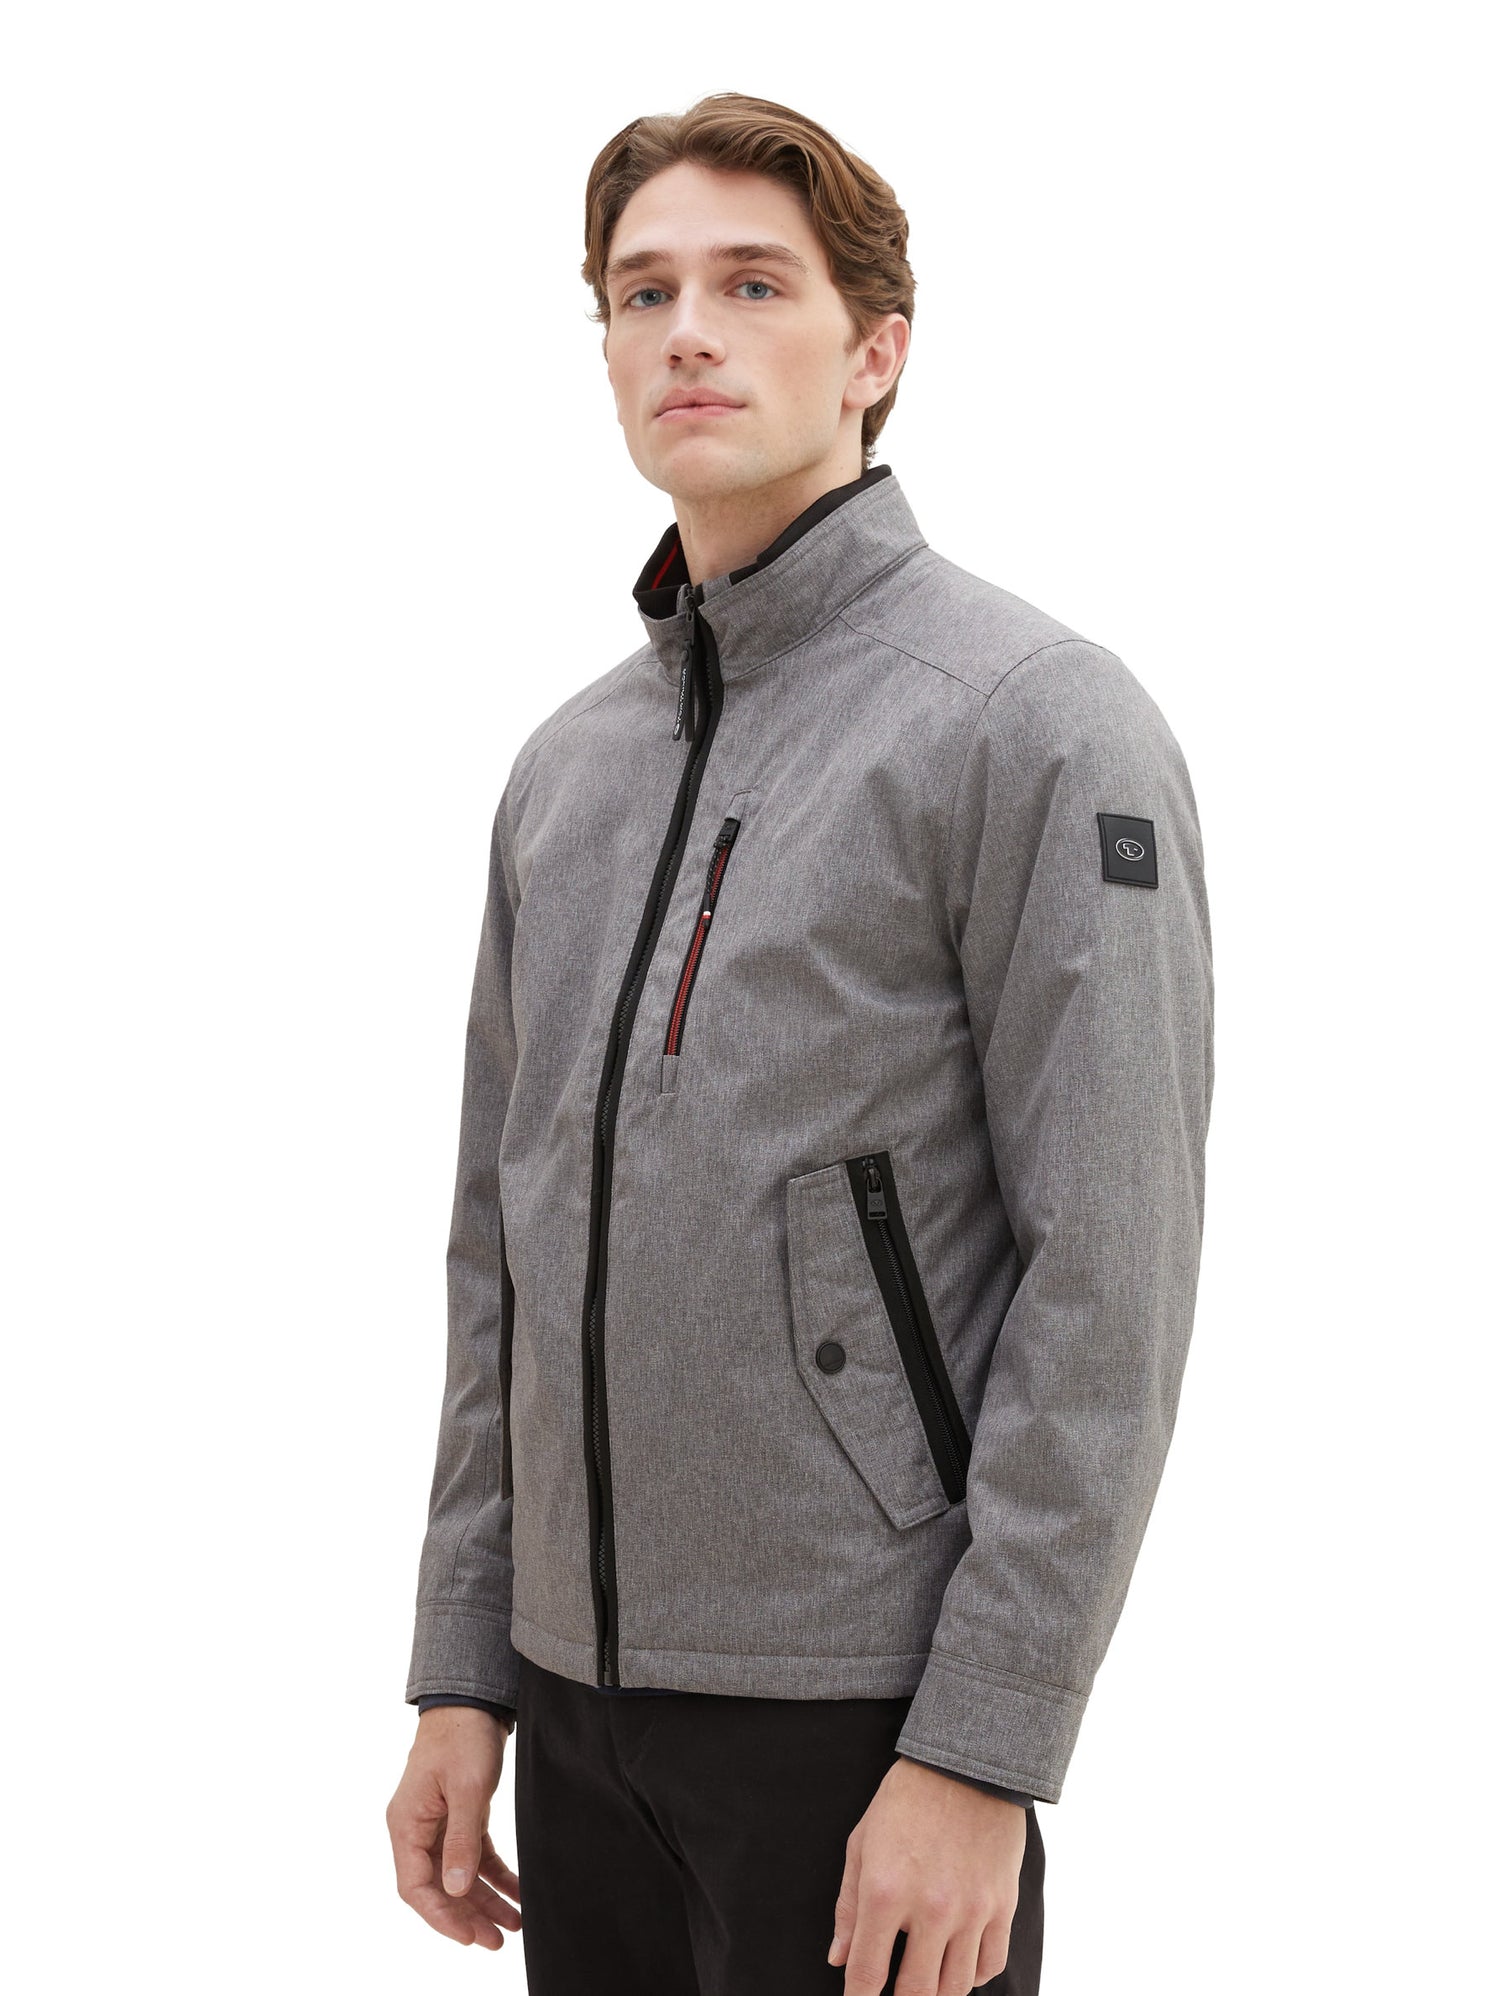 Padded Jacket With Multiple Pockets_1037331_18960_05